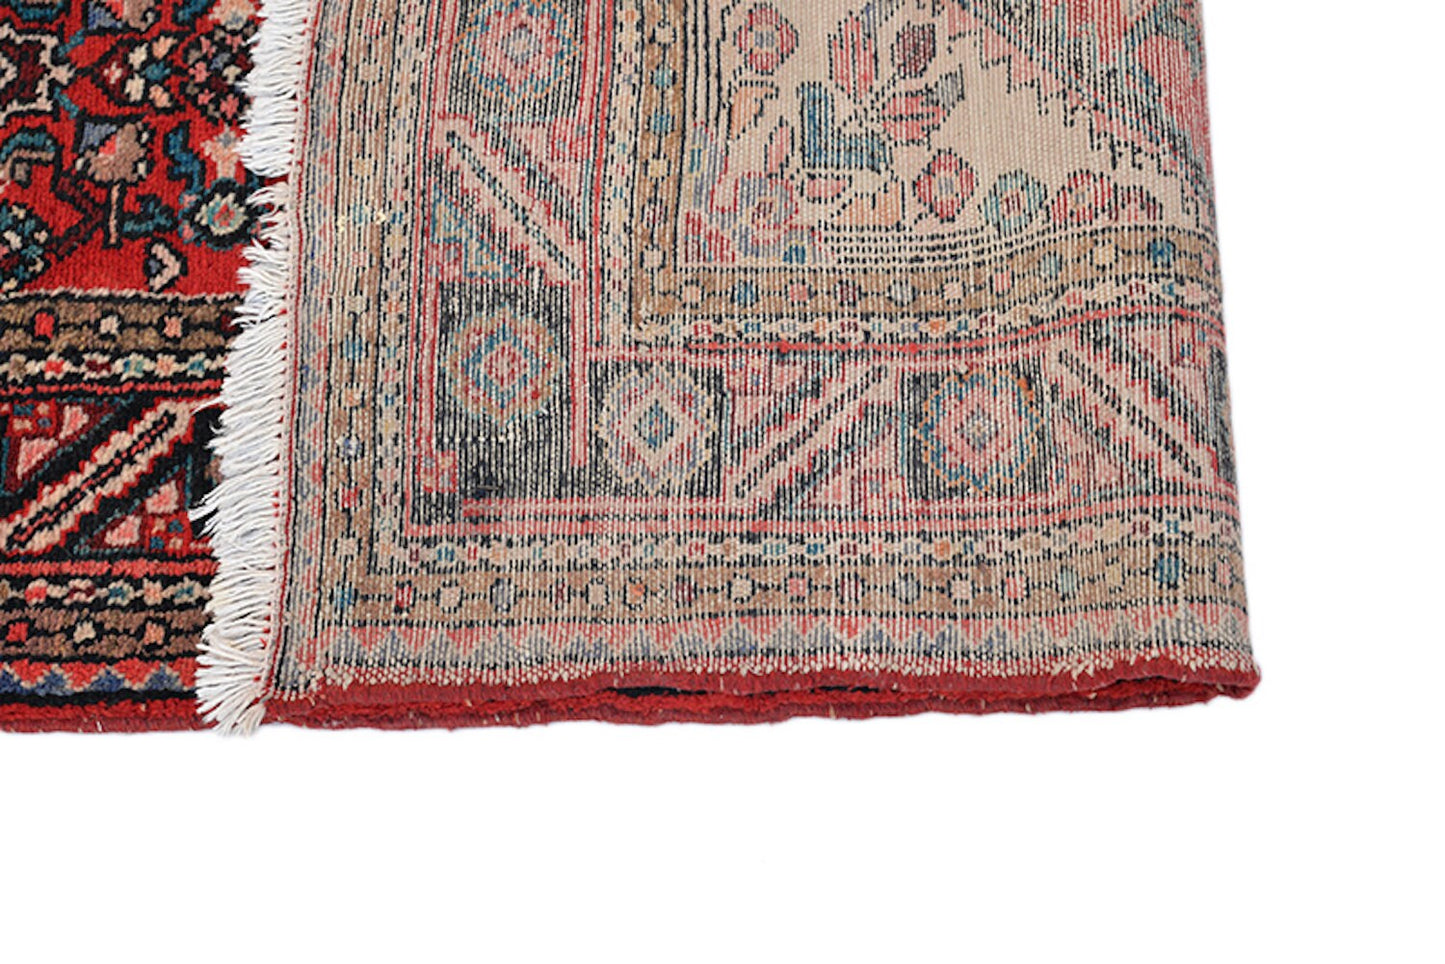 Red Oriental Runner Rug, Long 3 x 10 Feet, Persian Style Design, Hand knotted Wool Antique Runner